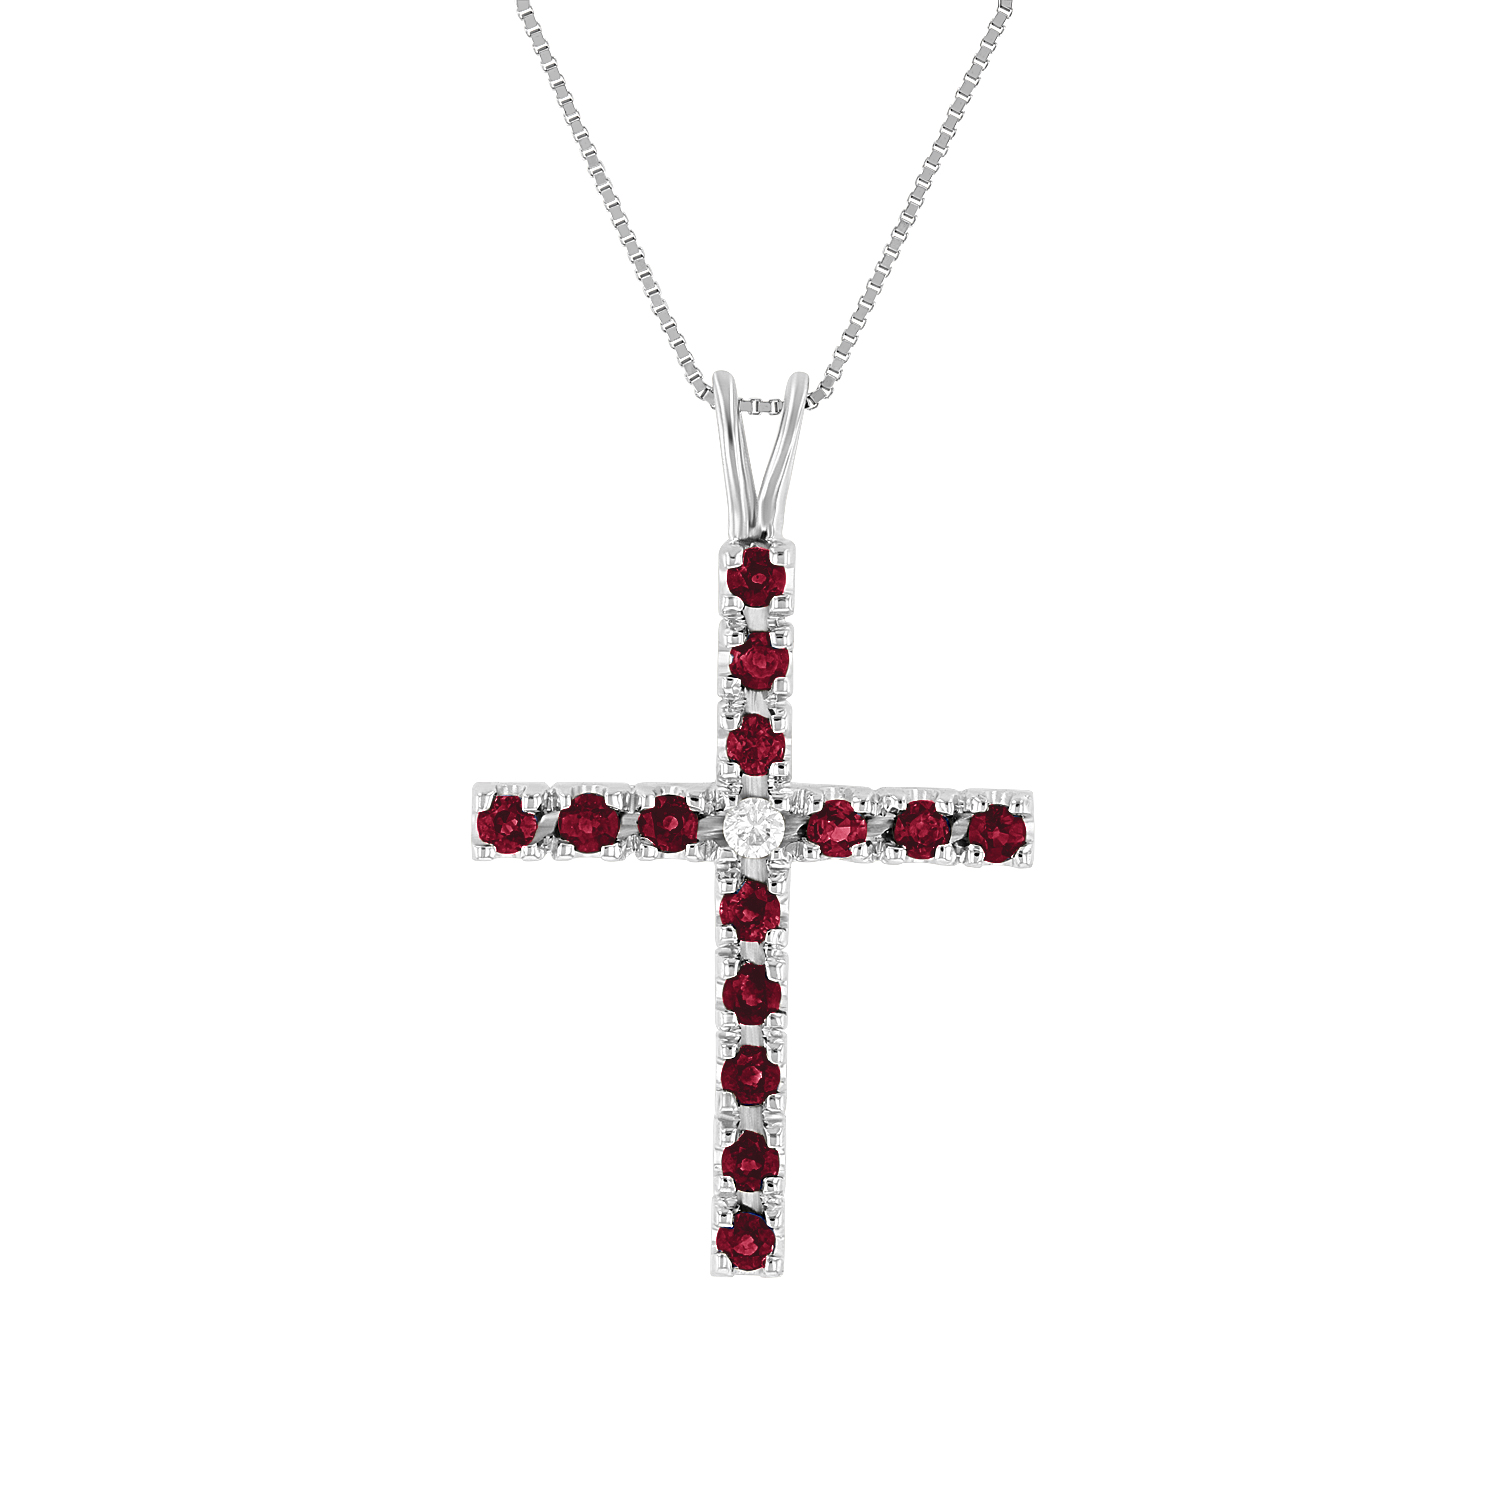 View 0.79ctw Diamond and Ruby Cross Pendant in 14k White Gold